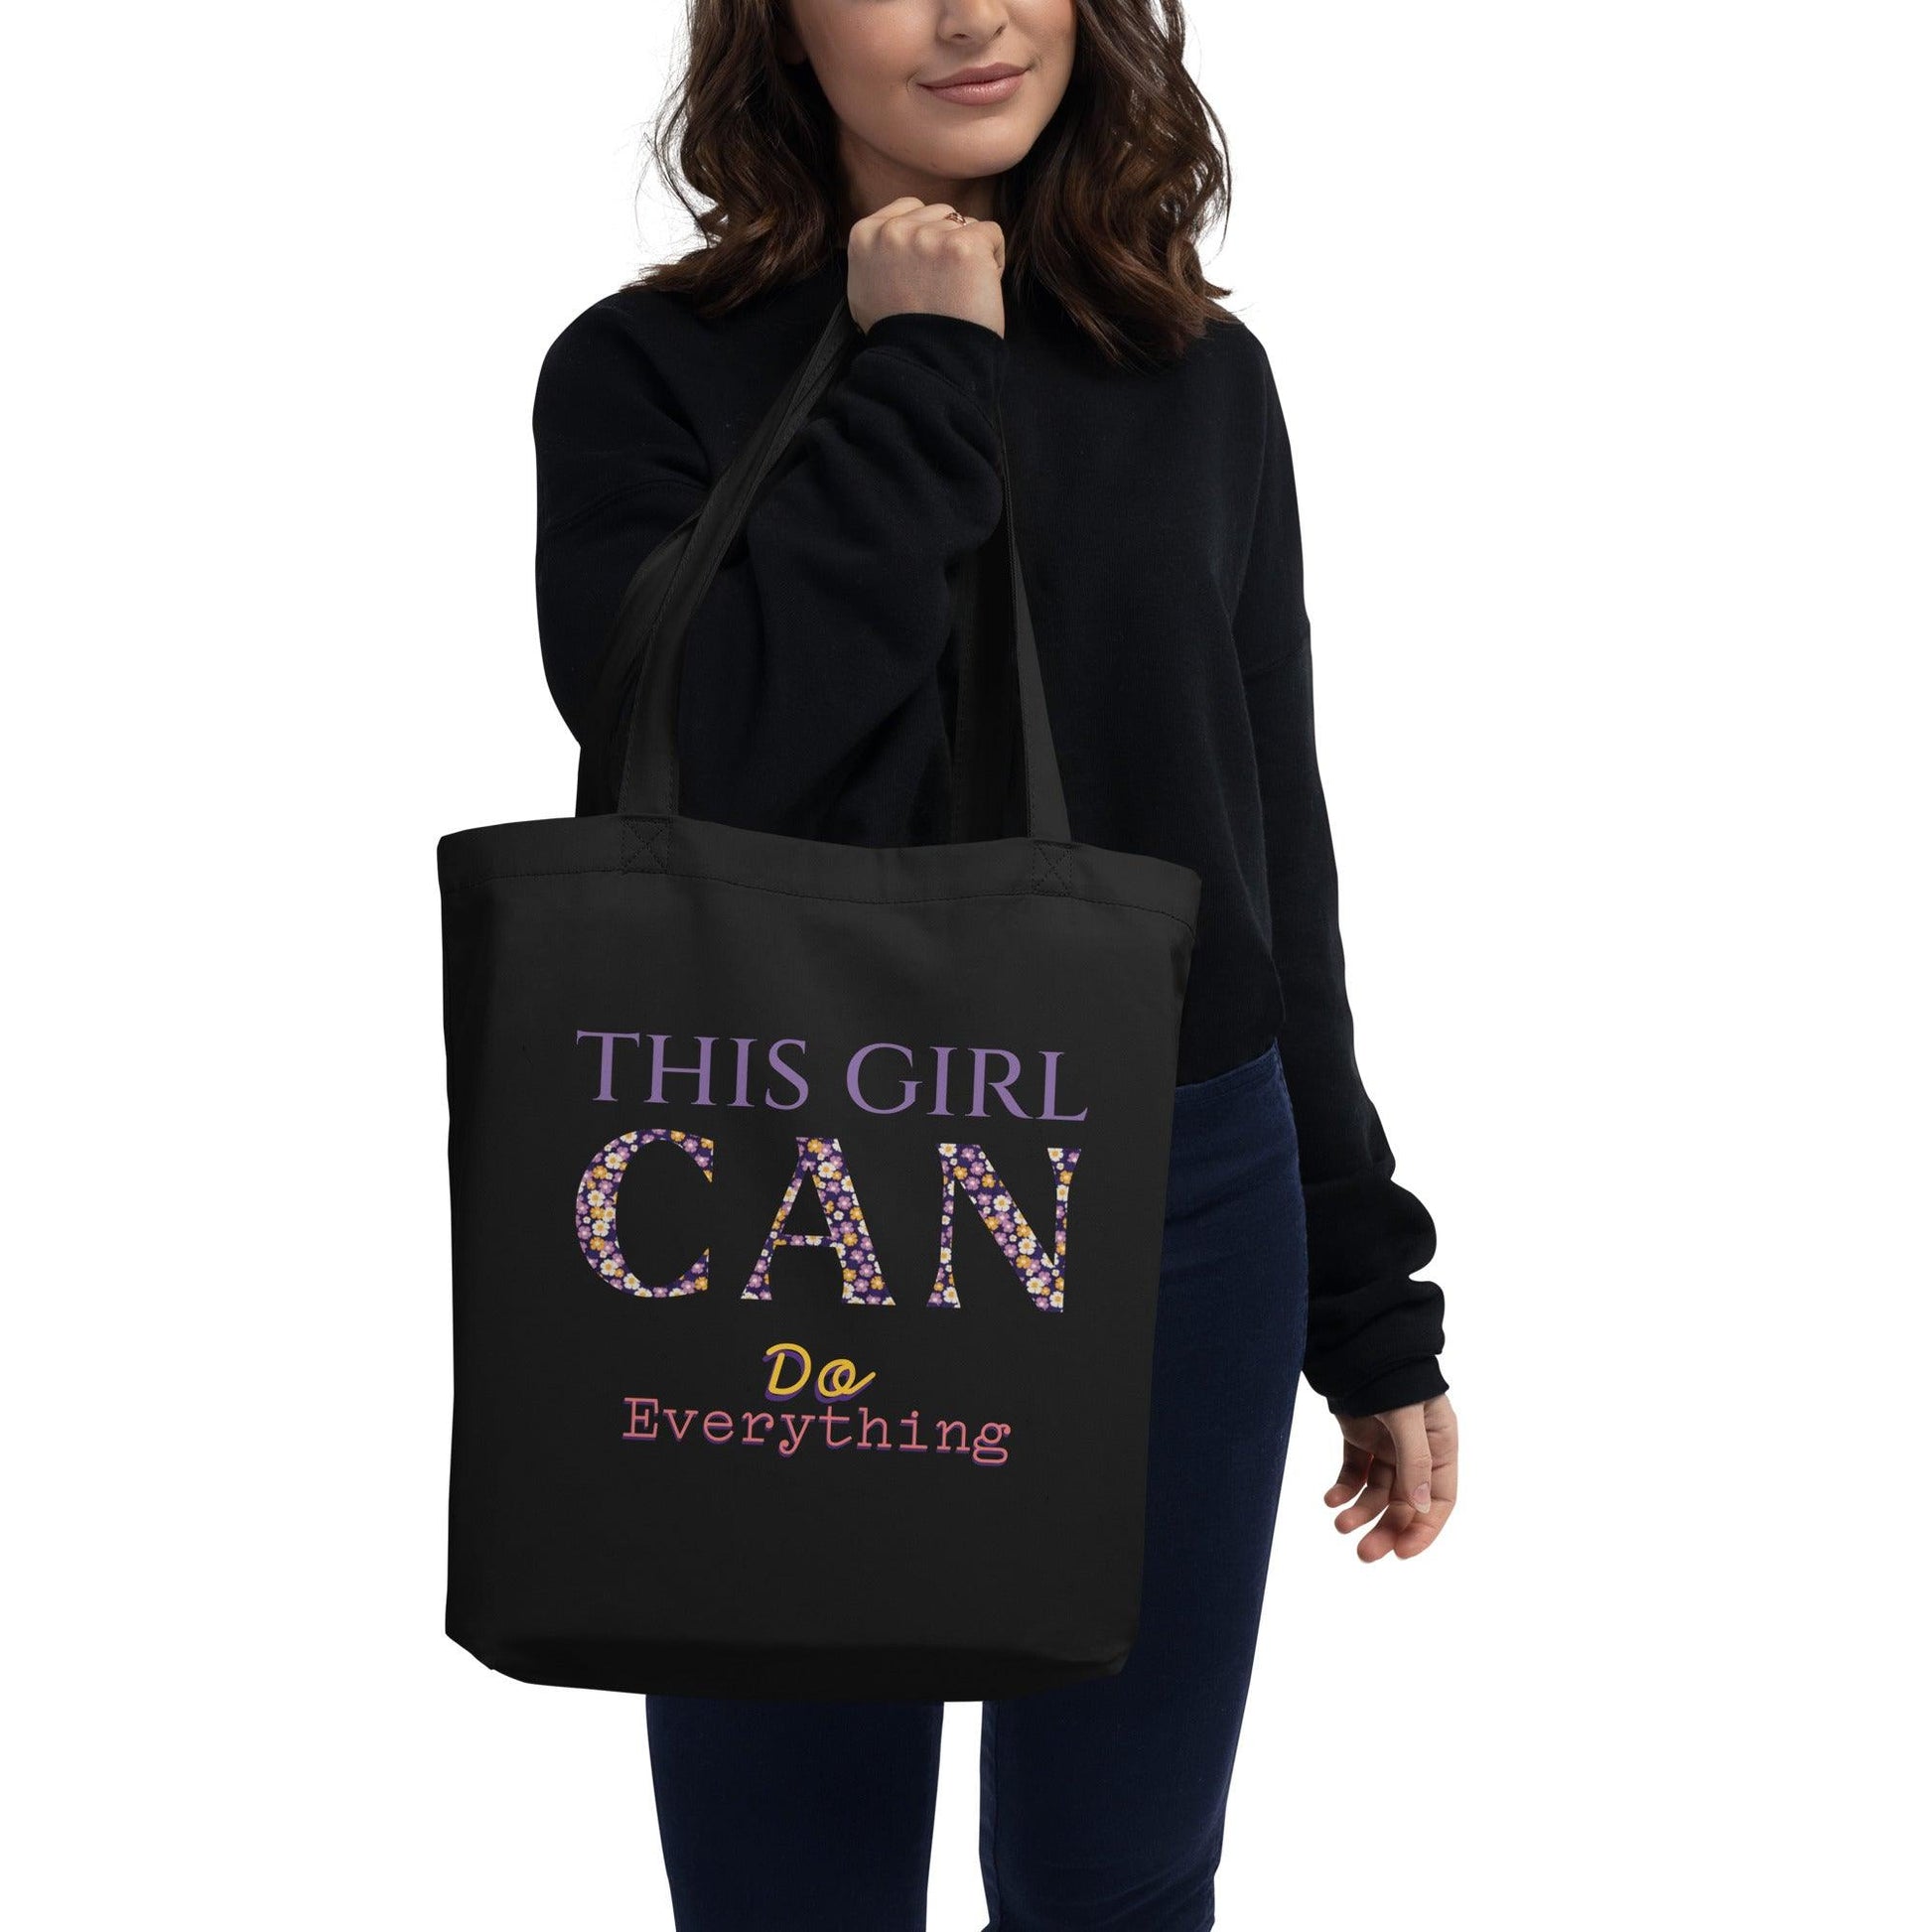 Can Do Everything Bag - L & M Kee, LLC